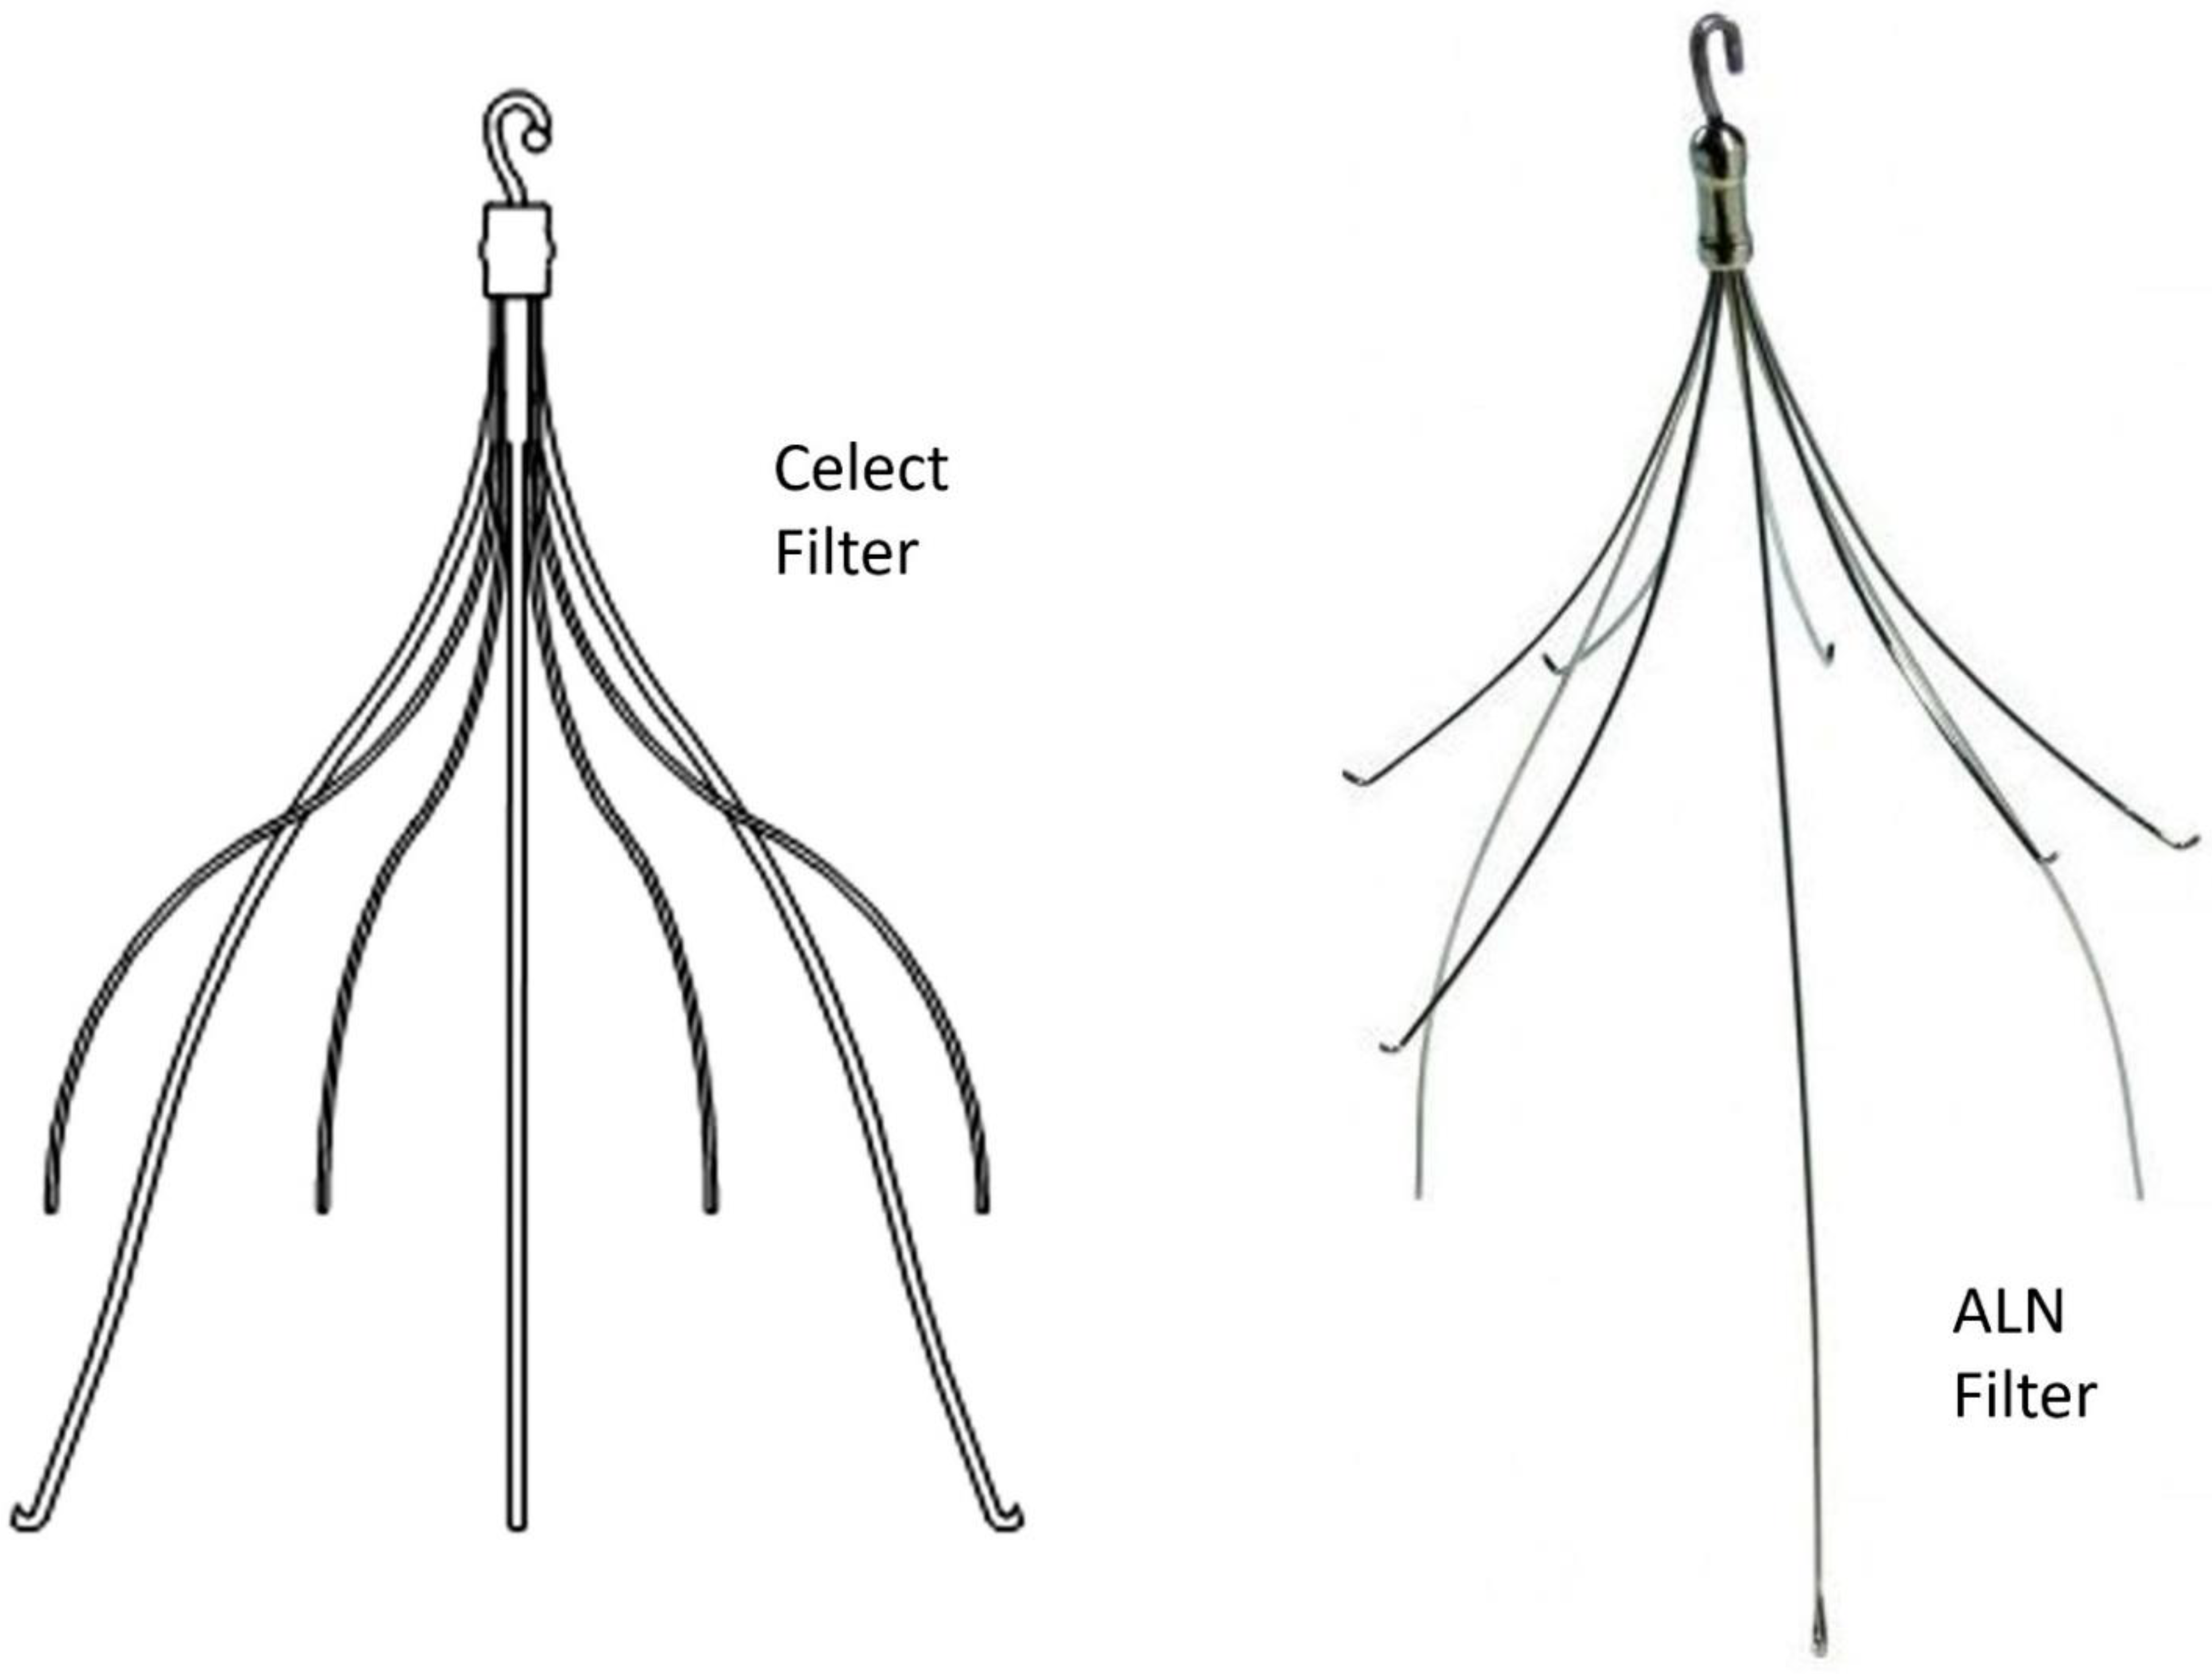 JVD | Free Full-Text | Effectiveness, Retrievability, and Safety of Celect  vs. ALN Inferior Vena Cava Filters: A Randomized Prospective Multicenter  Controlled Study